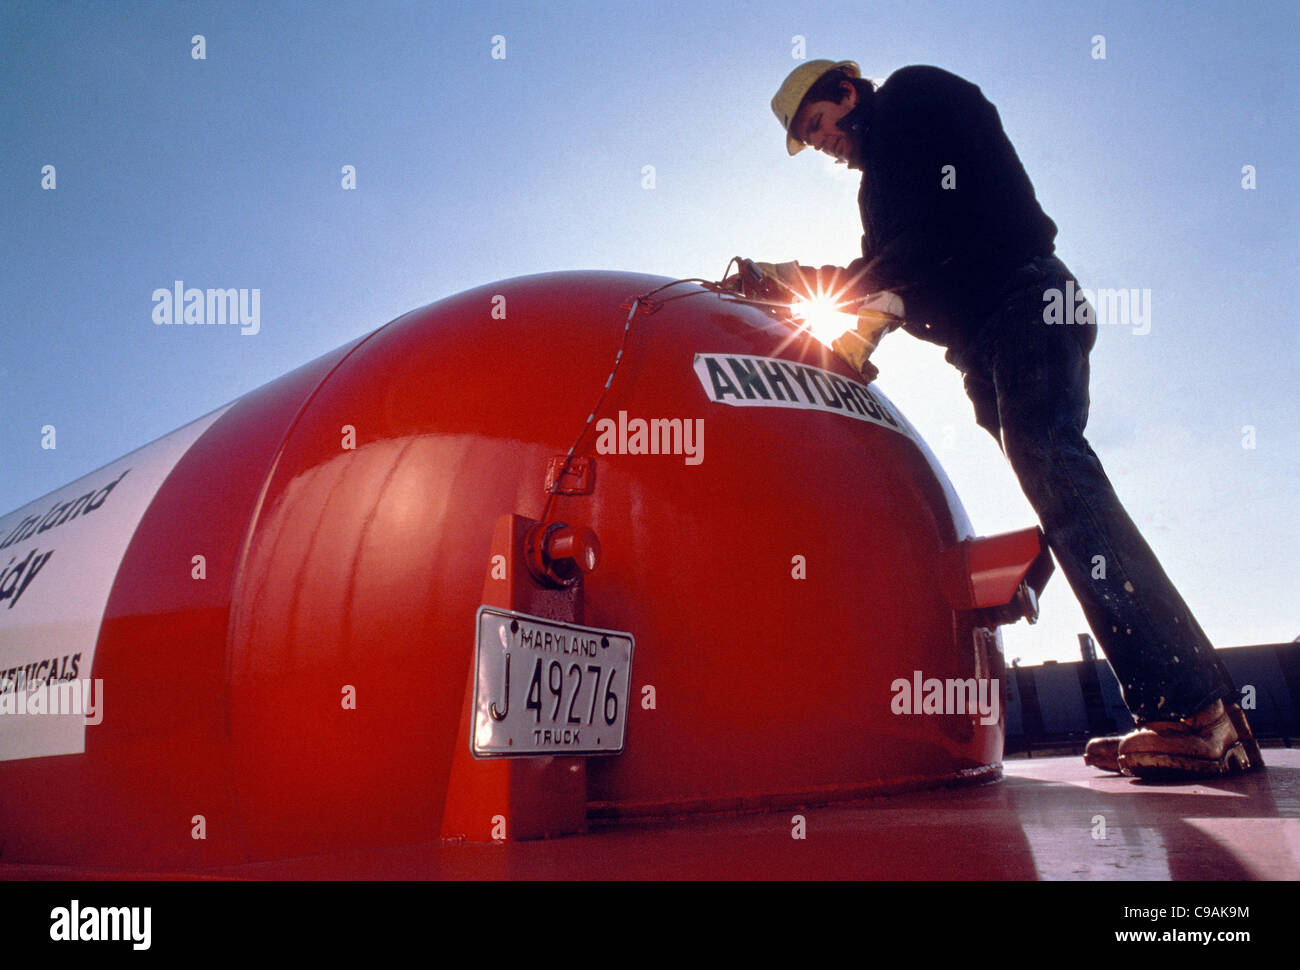 Worker at a distributor of solvents, chemicals and lubricants Stock Photo